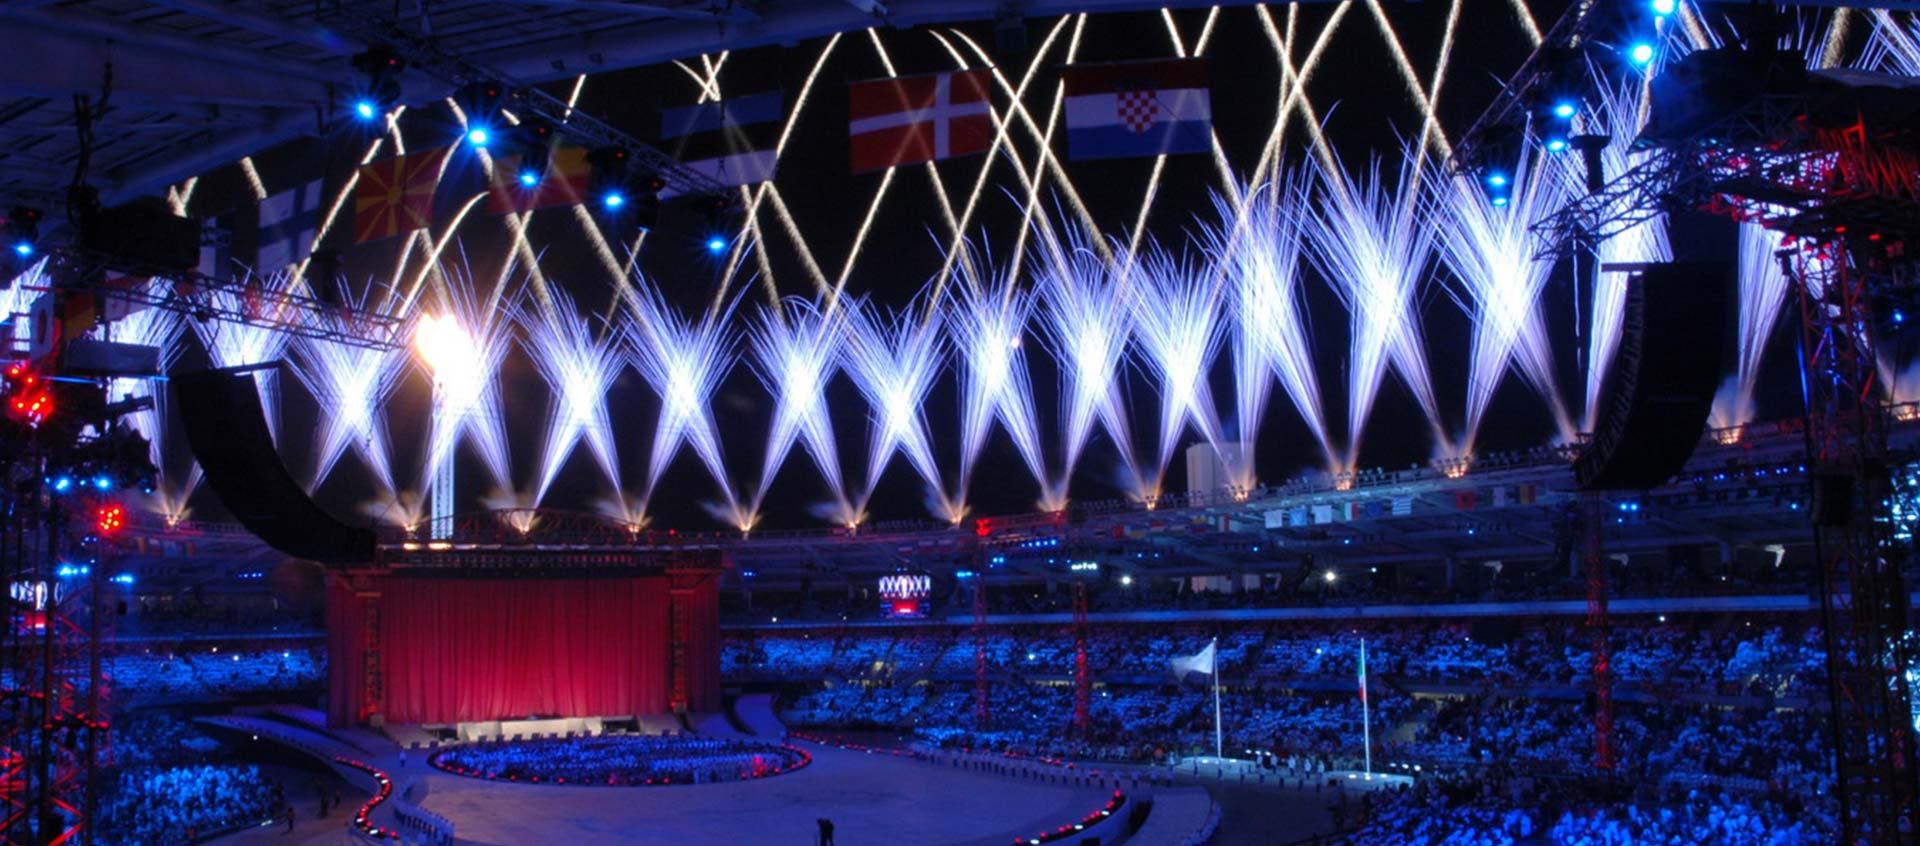 ITALY - Turin - Opening and Closing Ceremony of Olympic Games